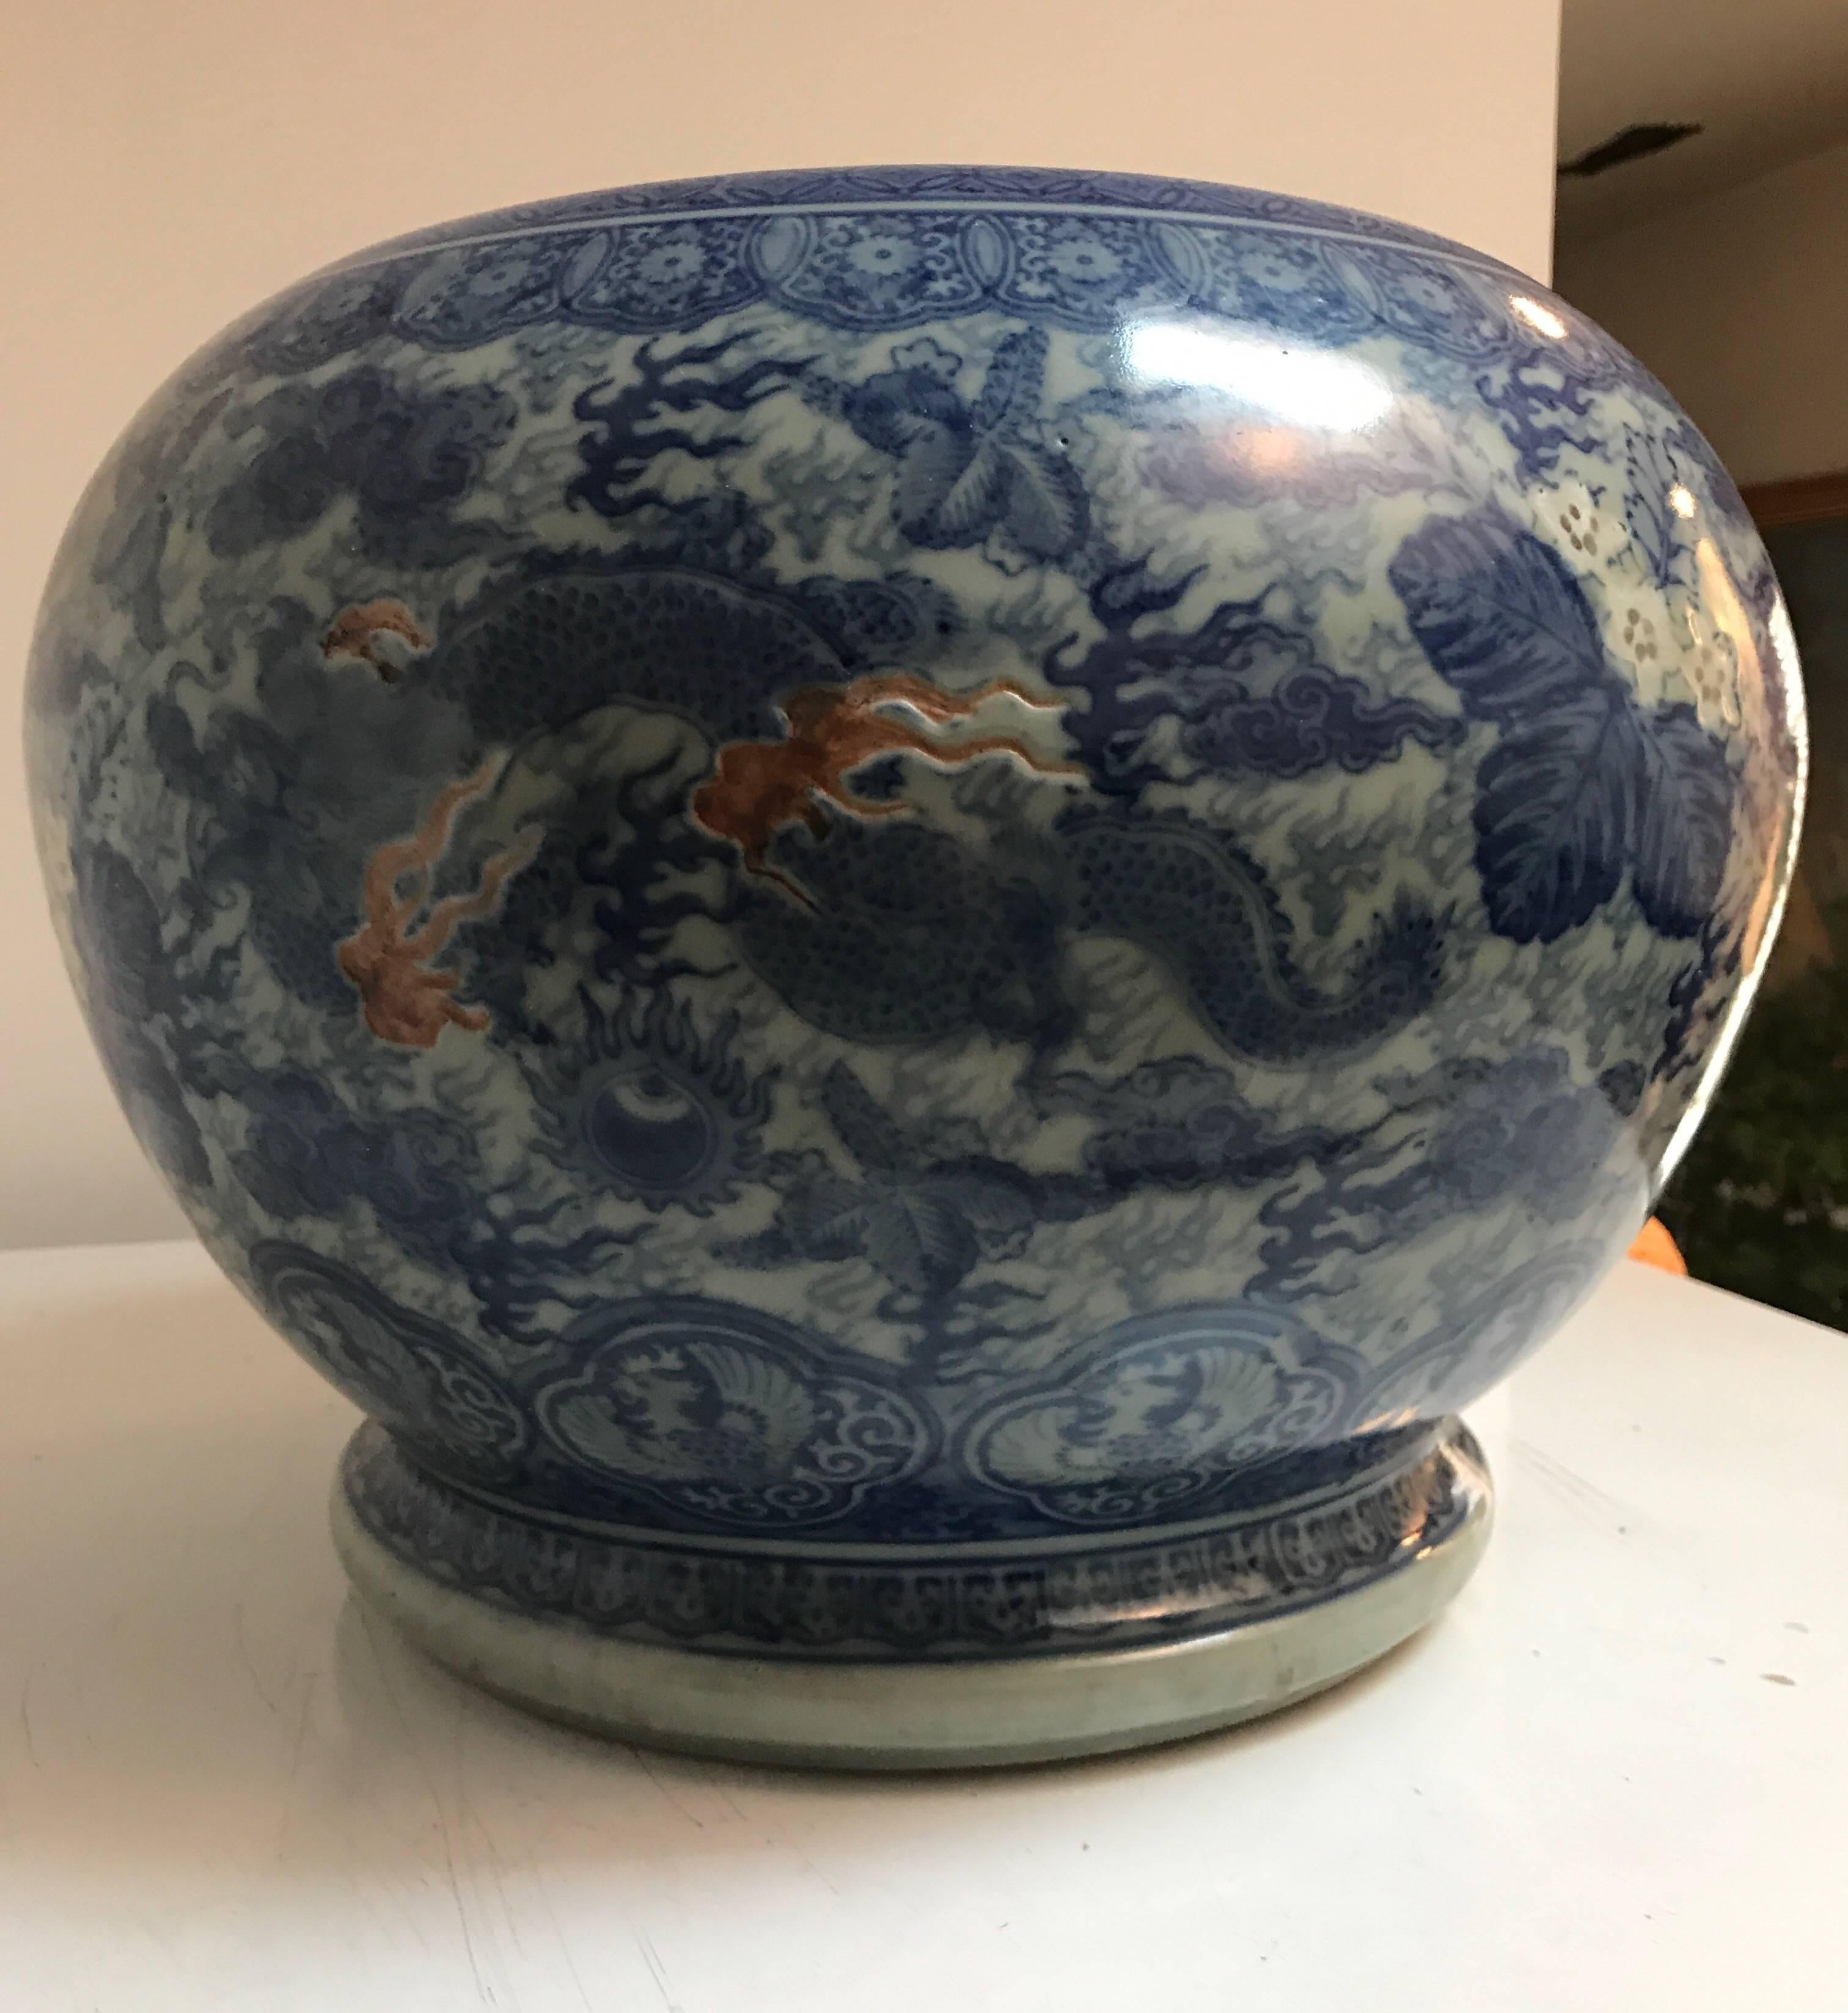 Japanese Blue and White Ceramic Fishbowl Planter Jardinière Cachepot In Good Condition For Sale In Chicago, IL